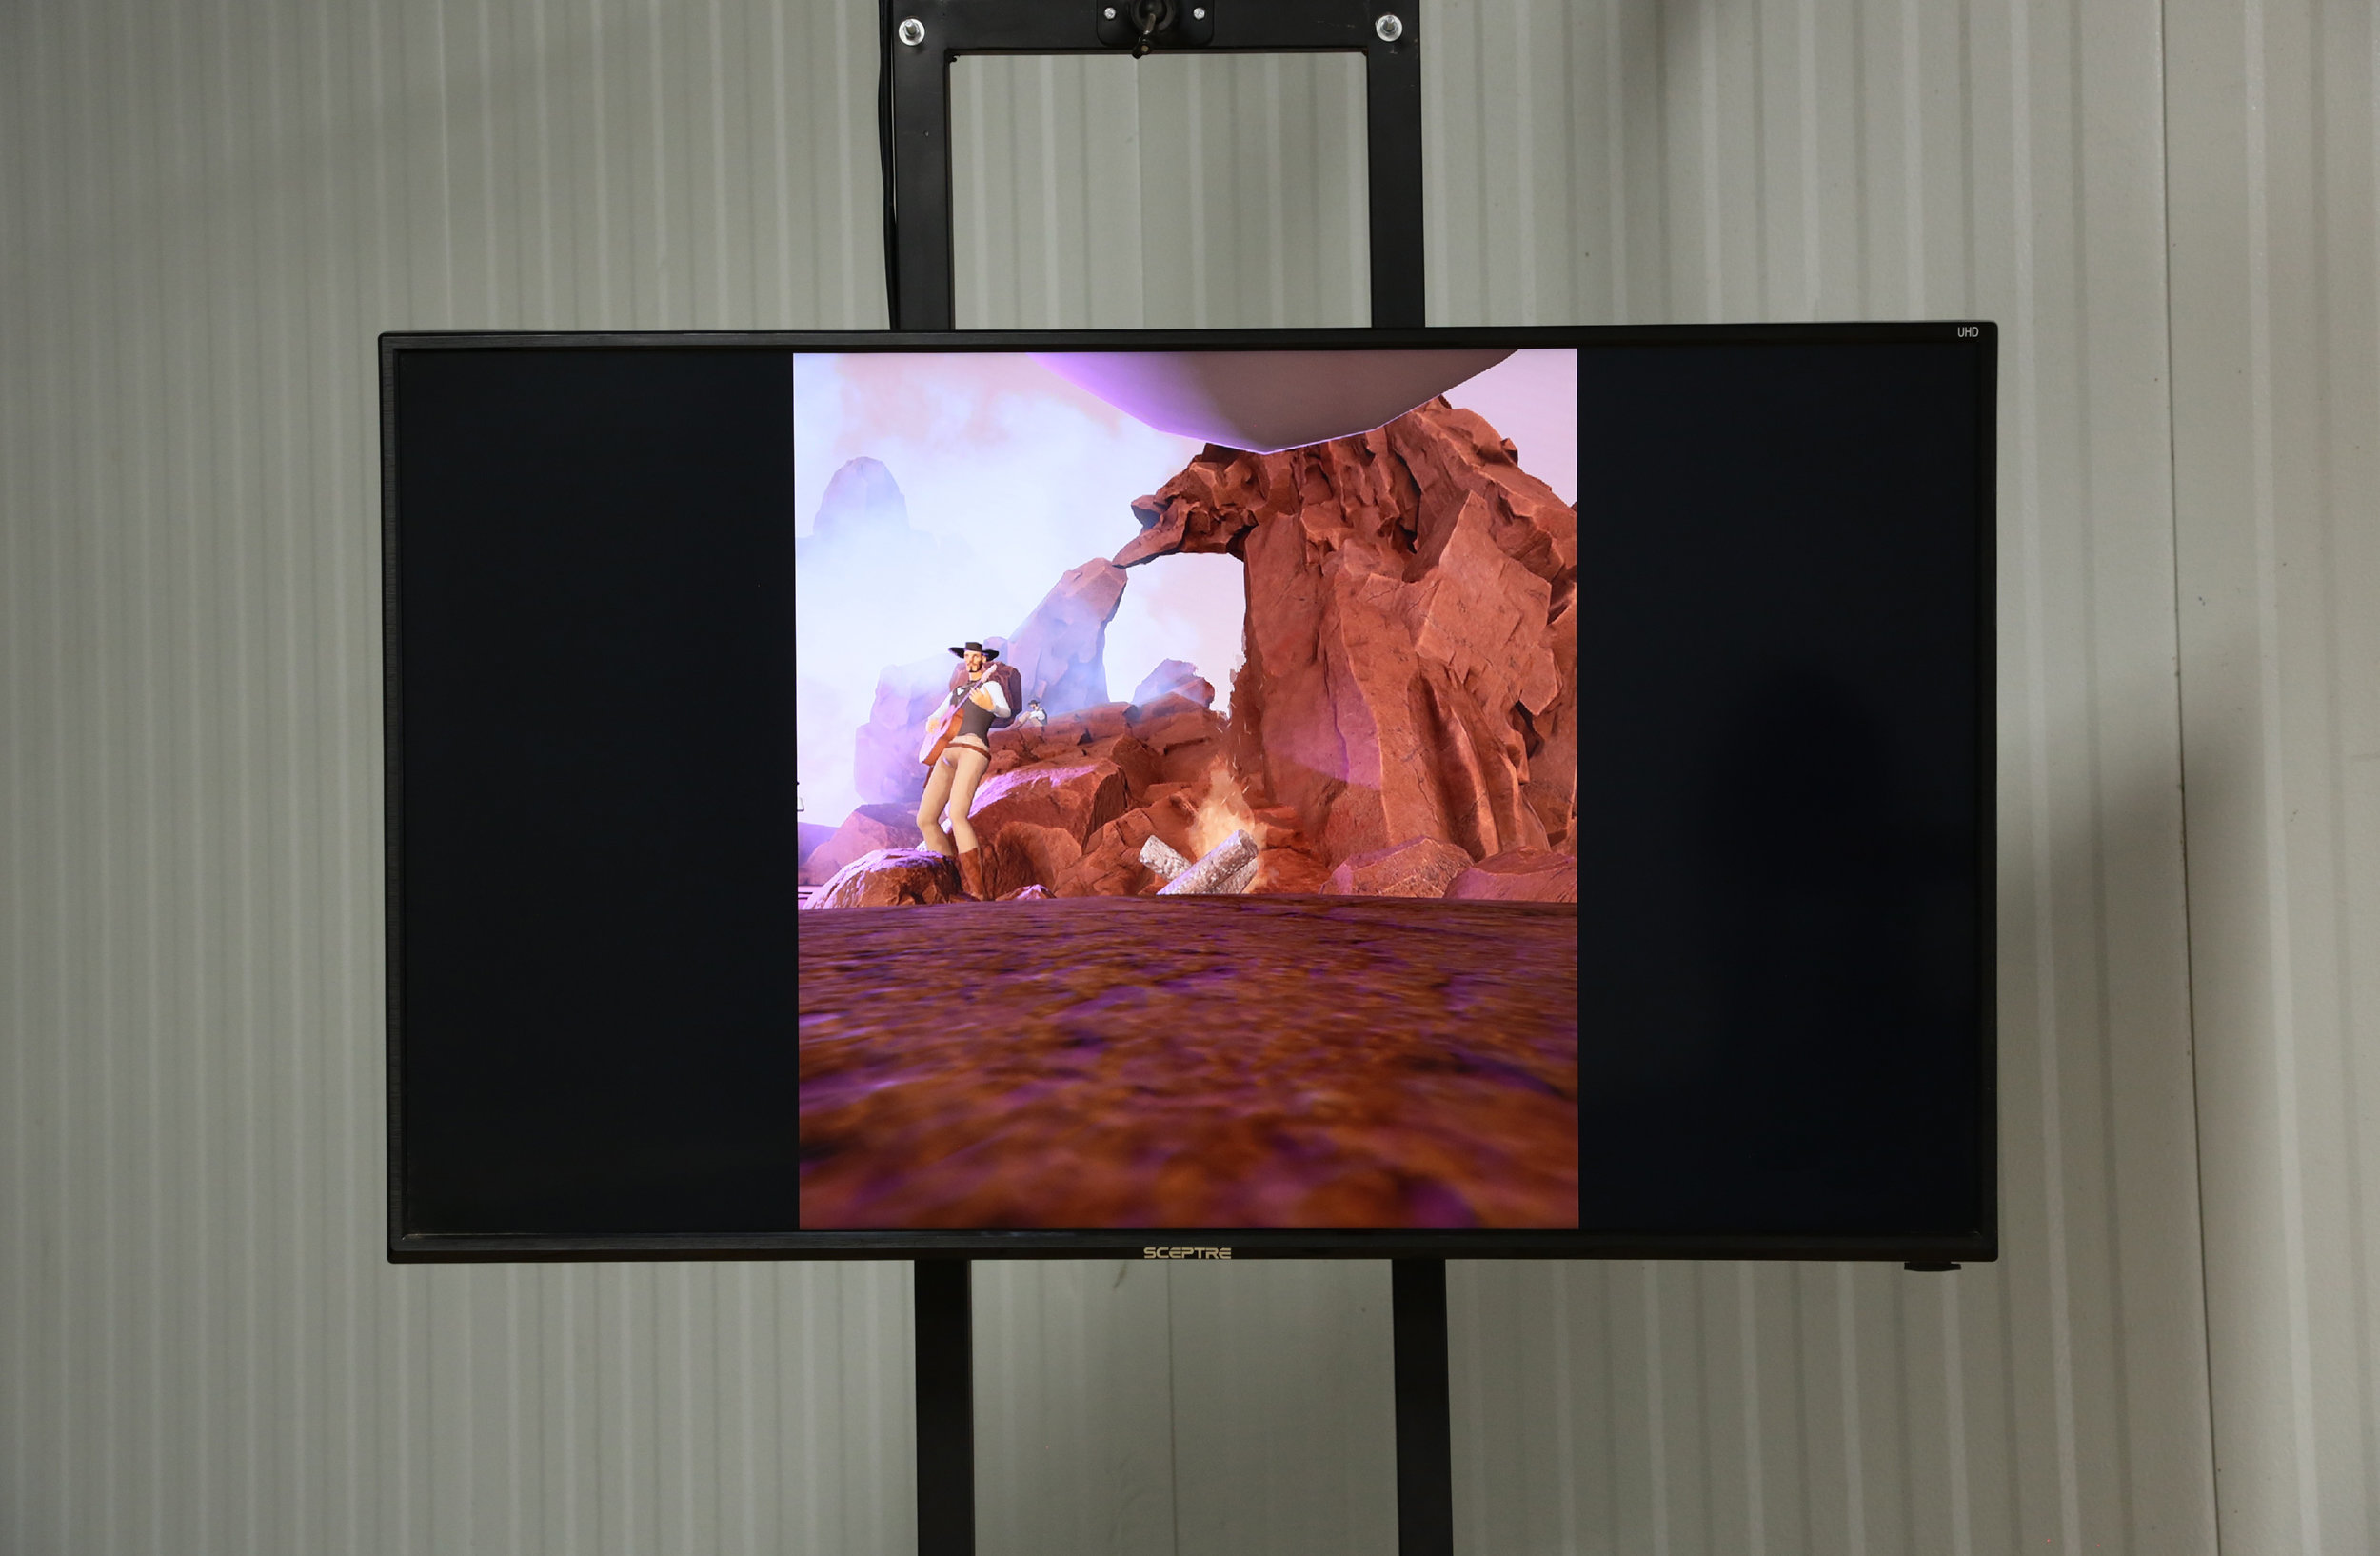  Installation view of Filip Kostic  Landgrab the Musical in Virtual Reality   SPRING/BREAK Art Show LA February 15-17, 2019   Link to press release  